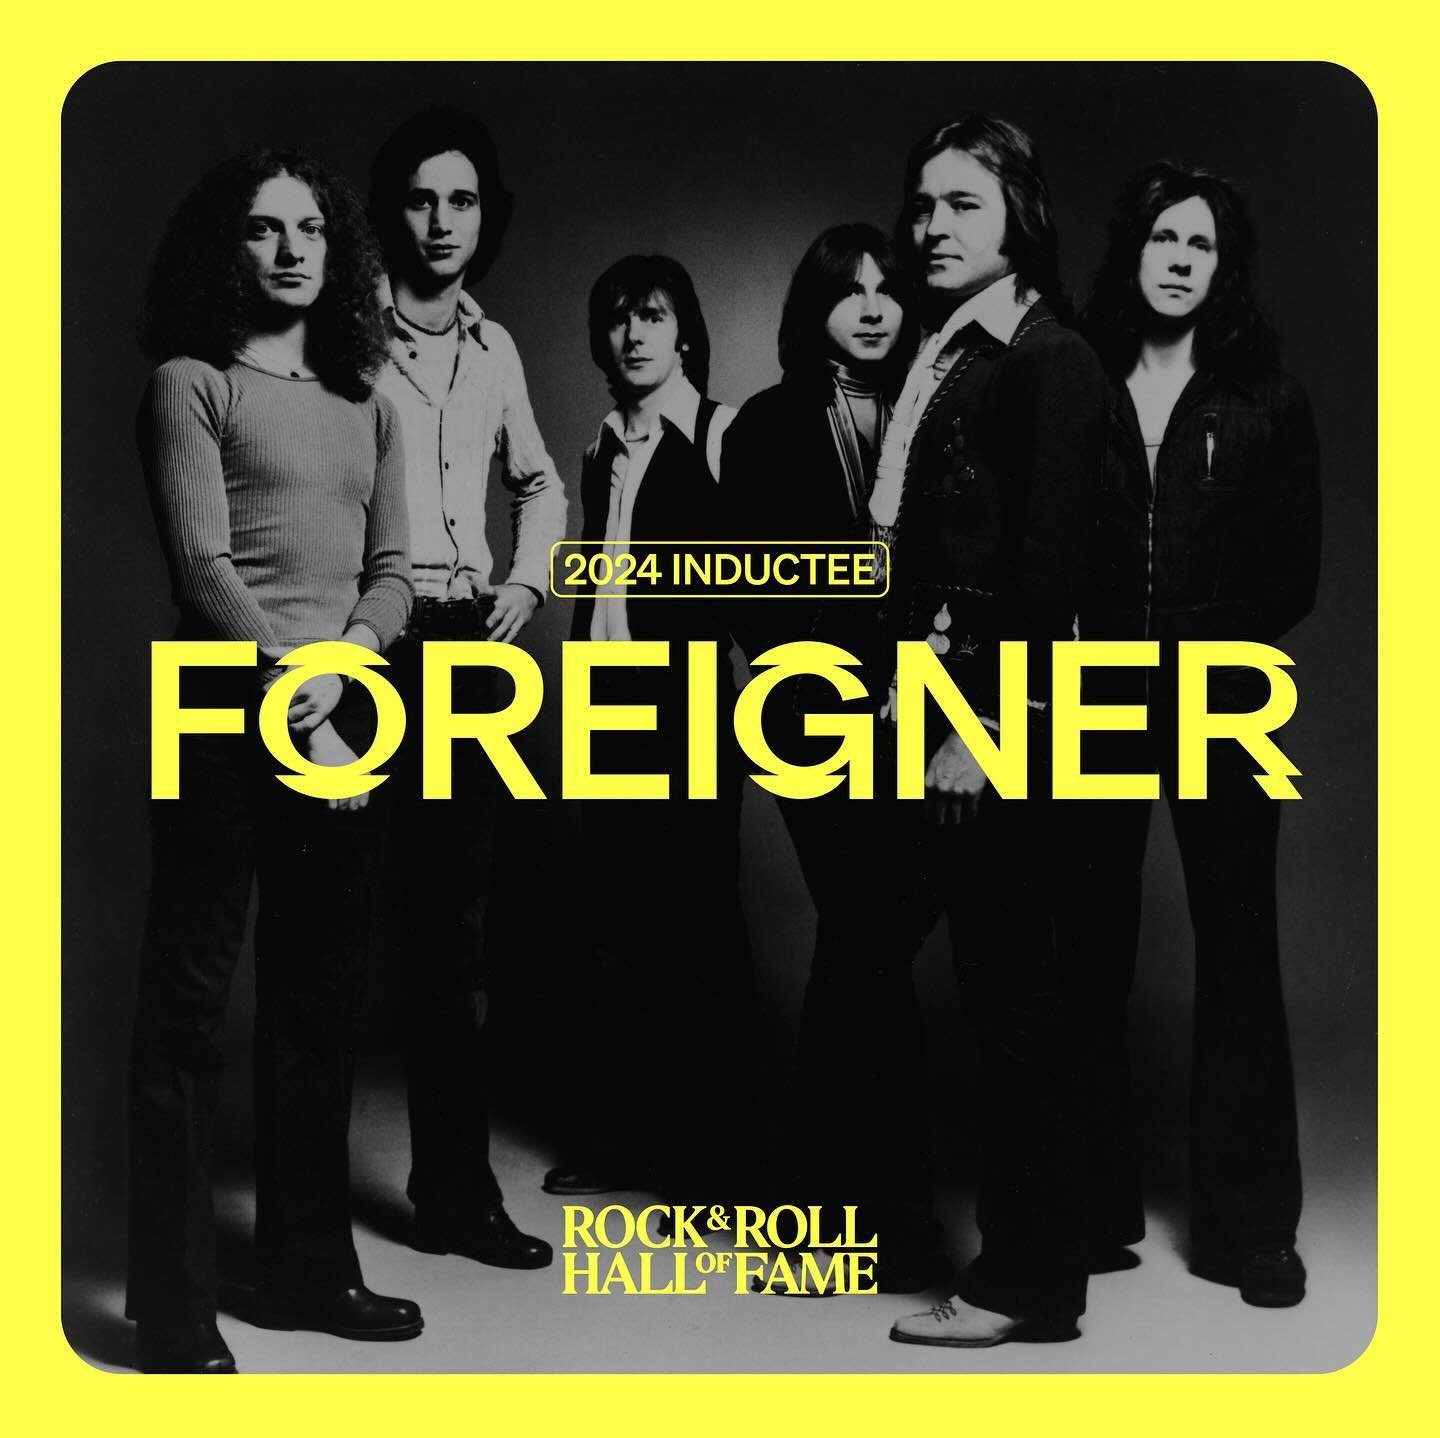 Thanks to all the fans and the @rockhall for this epochal achievement in the odyssey of FOREIGNER.